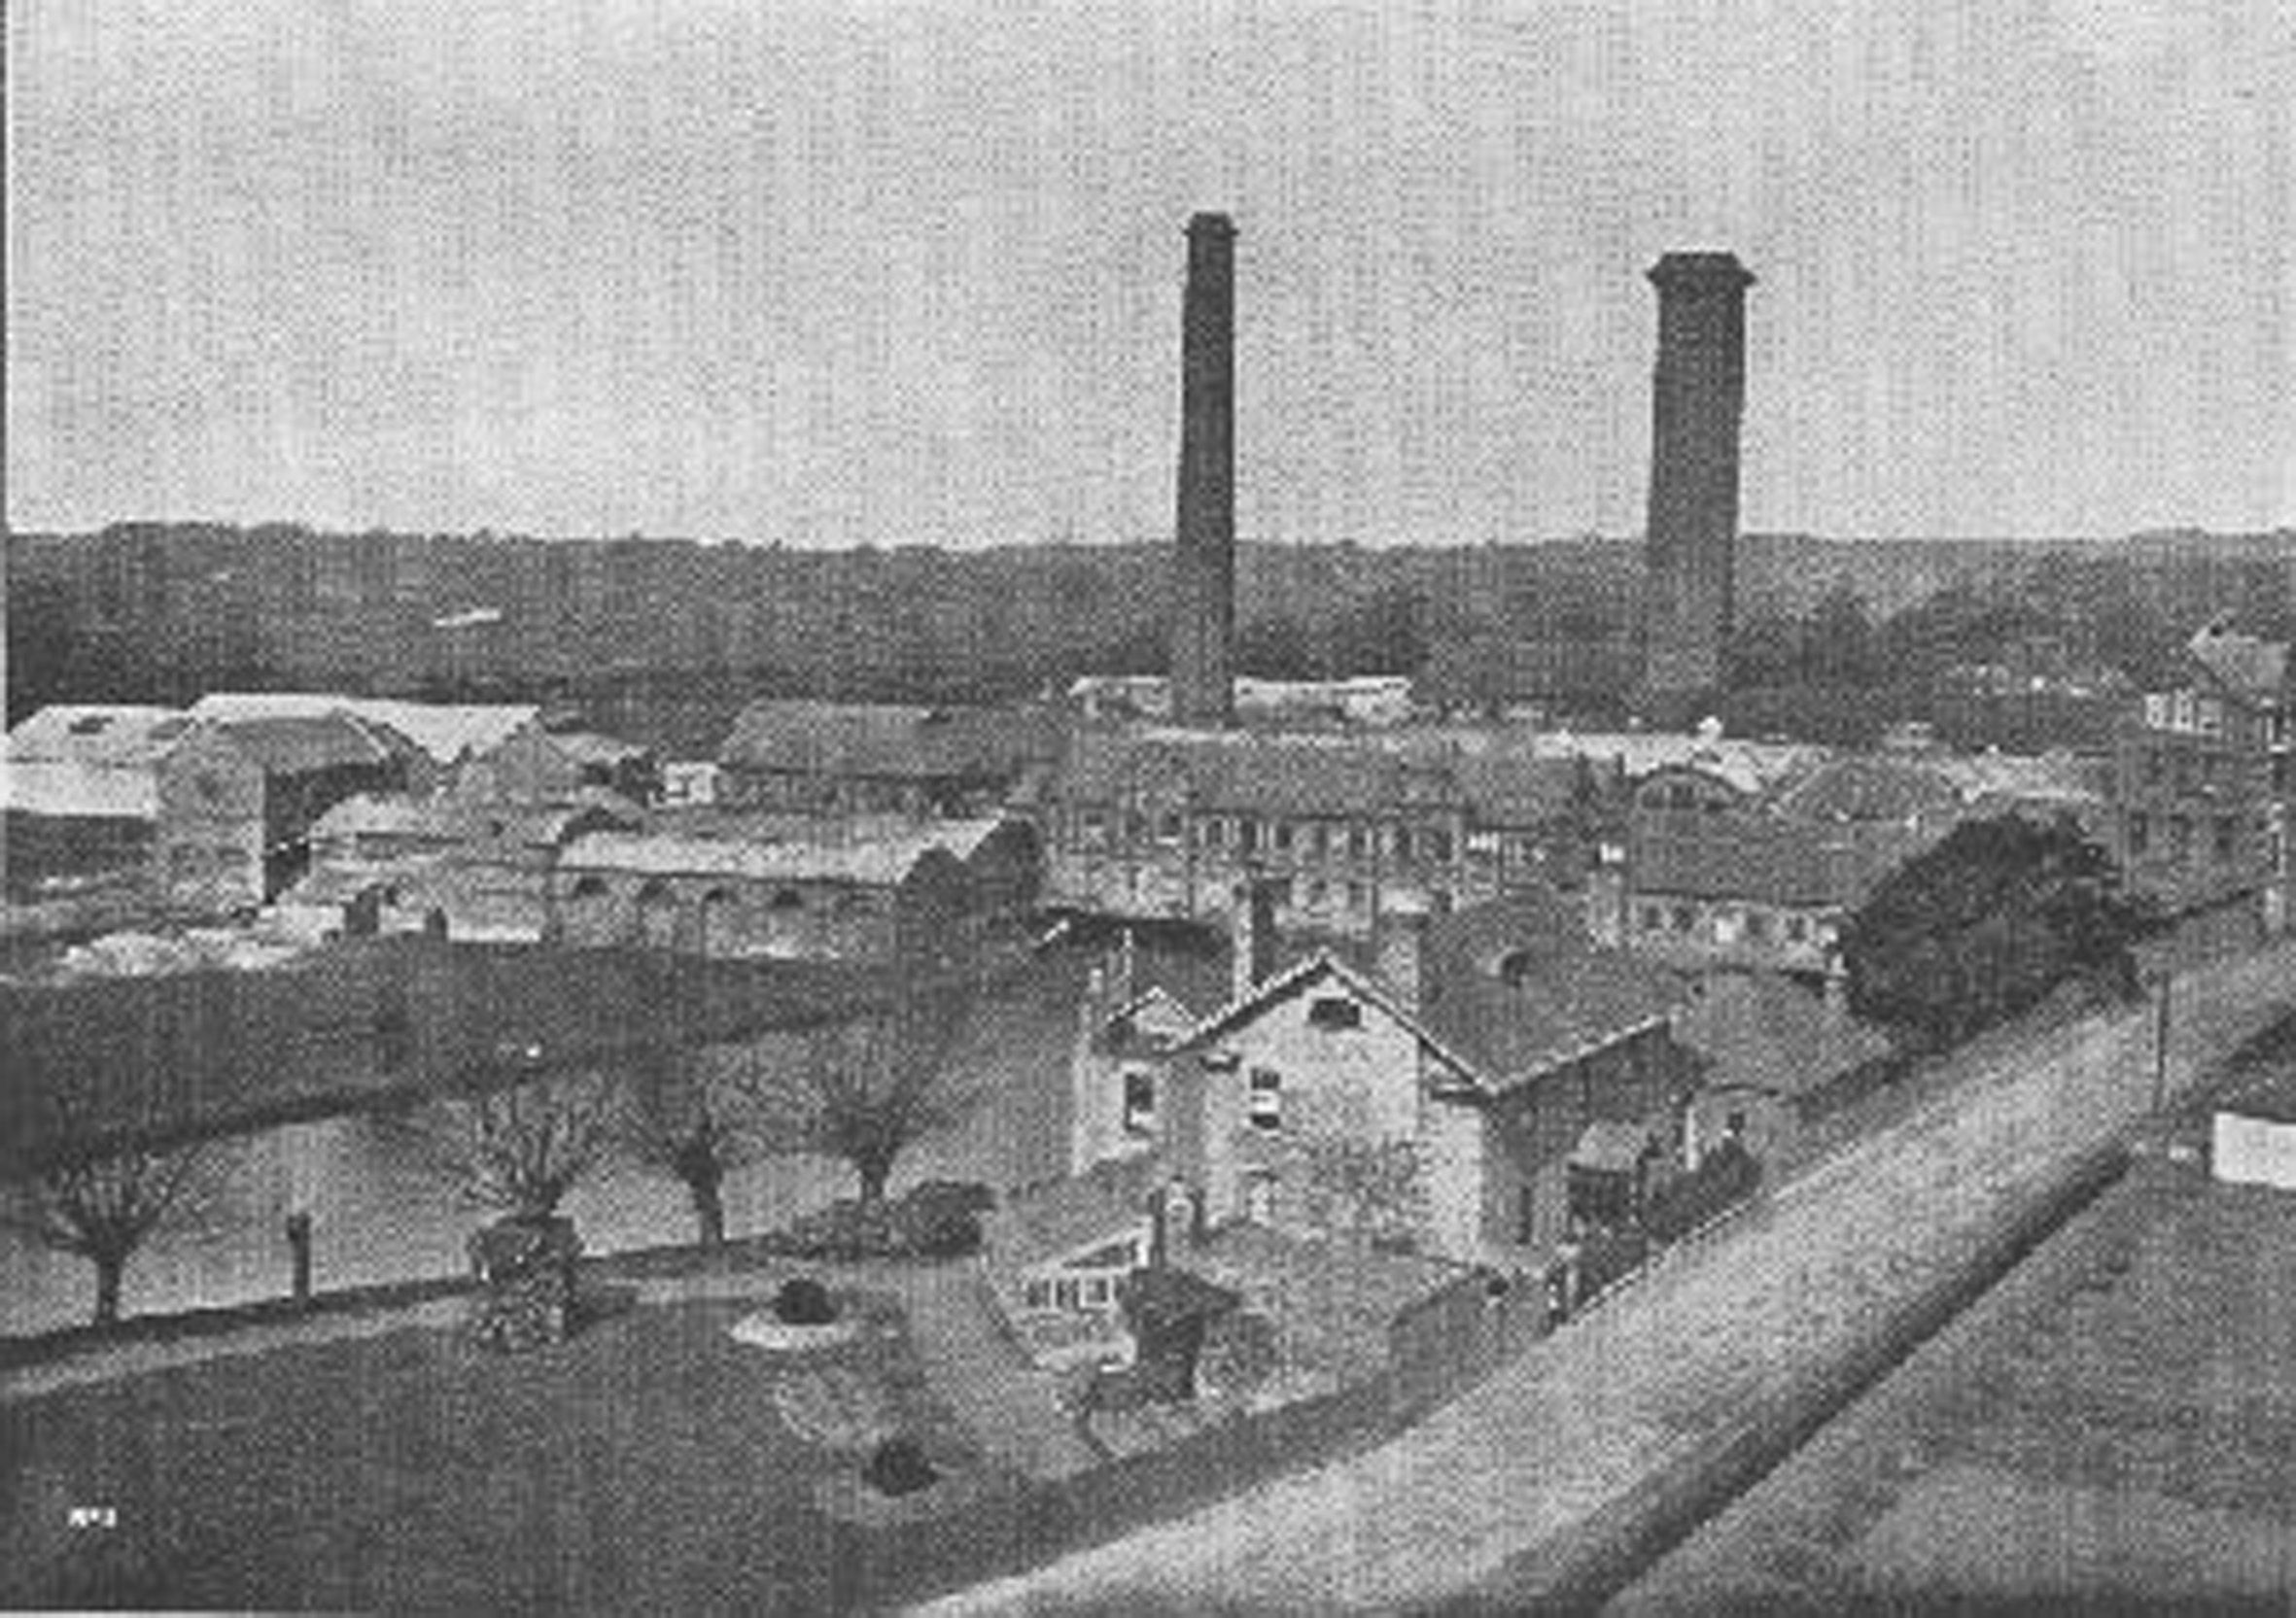 Horton Kirby Mill, South Darenth, Kent in 1872 